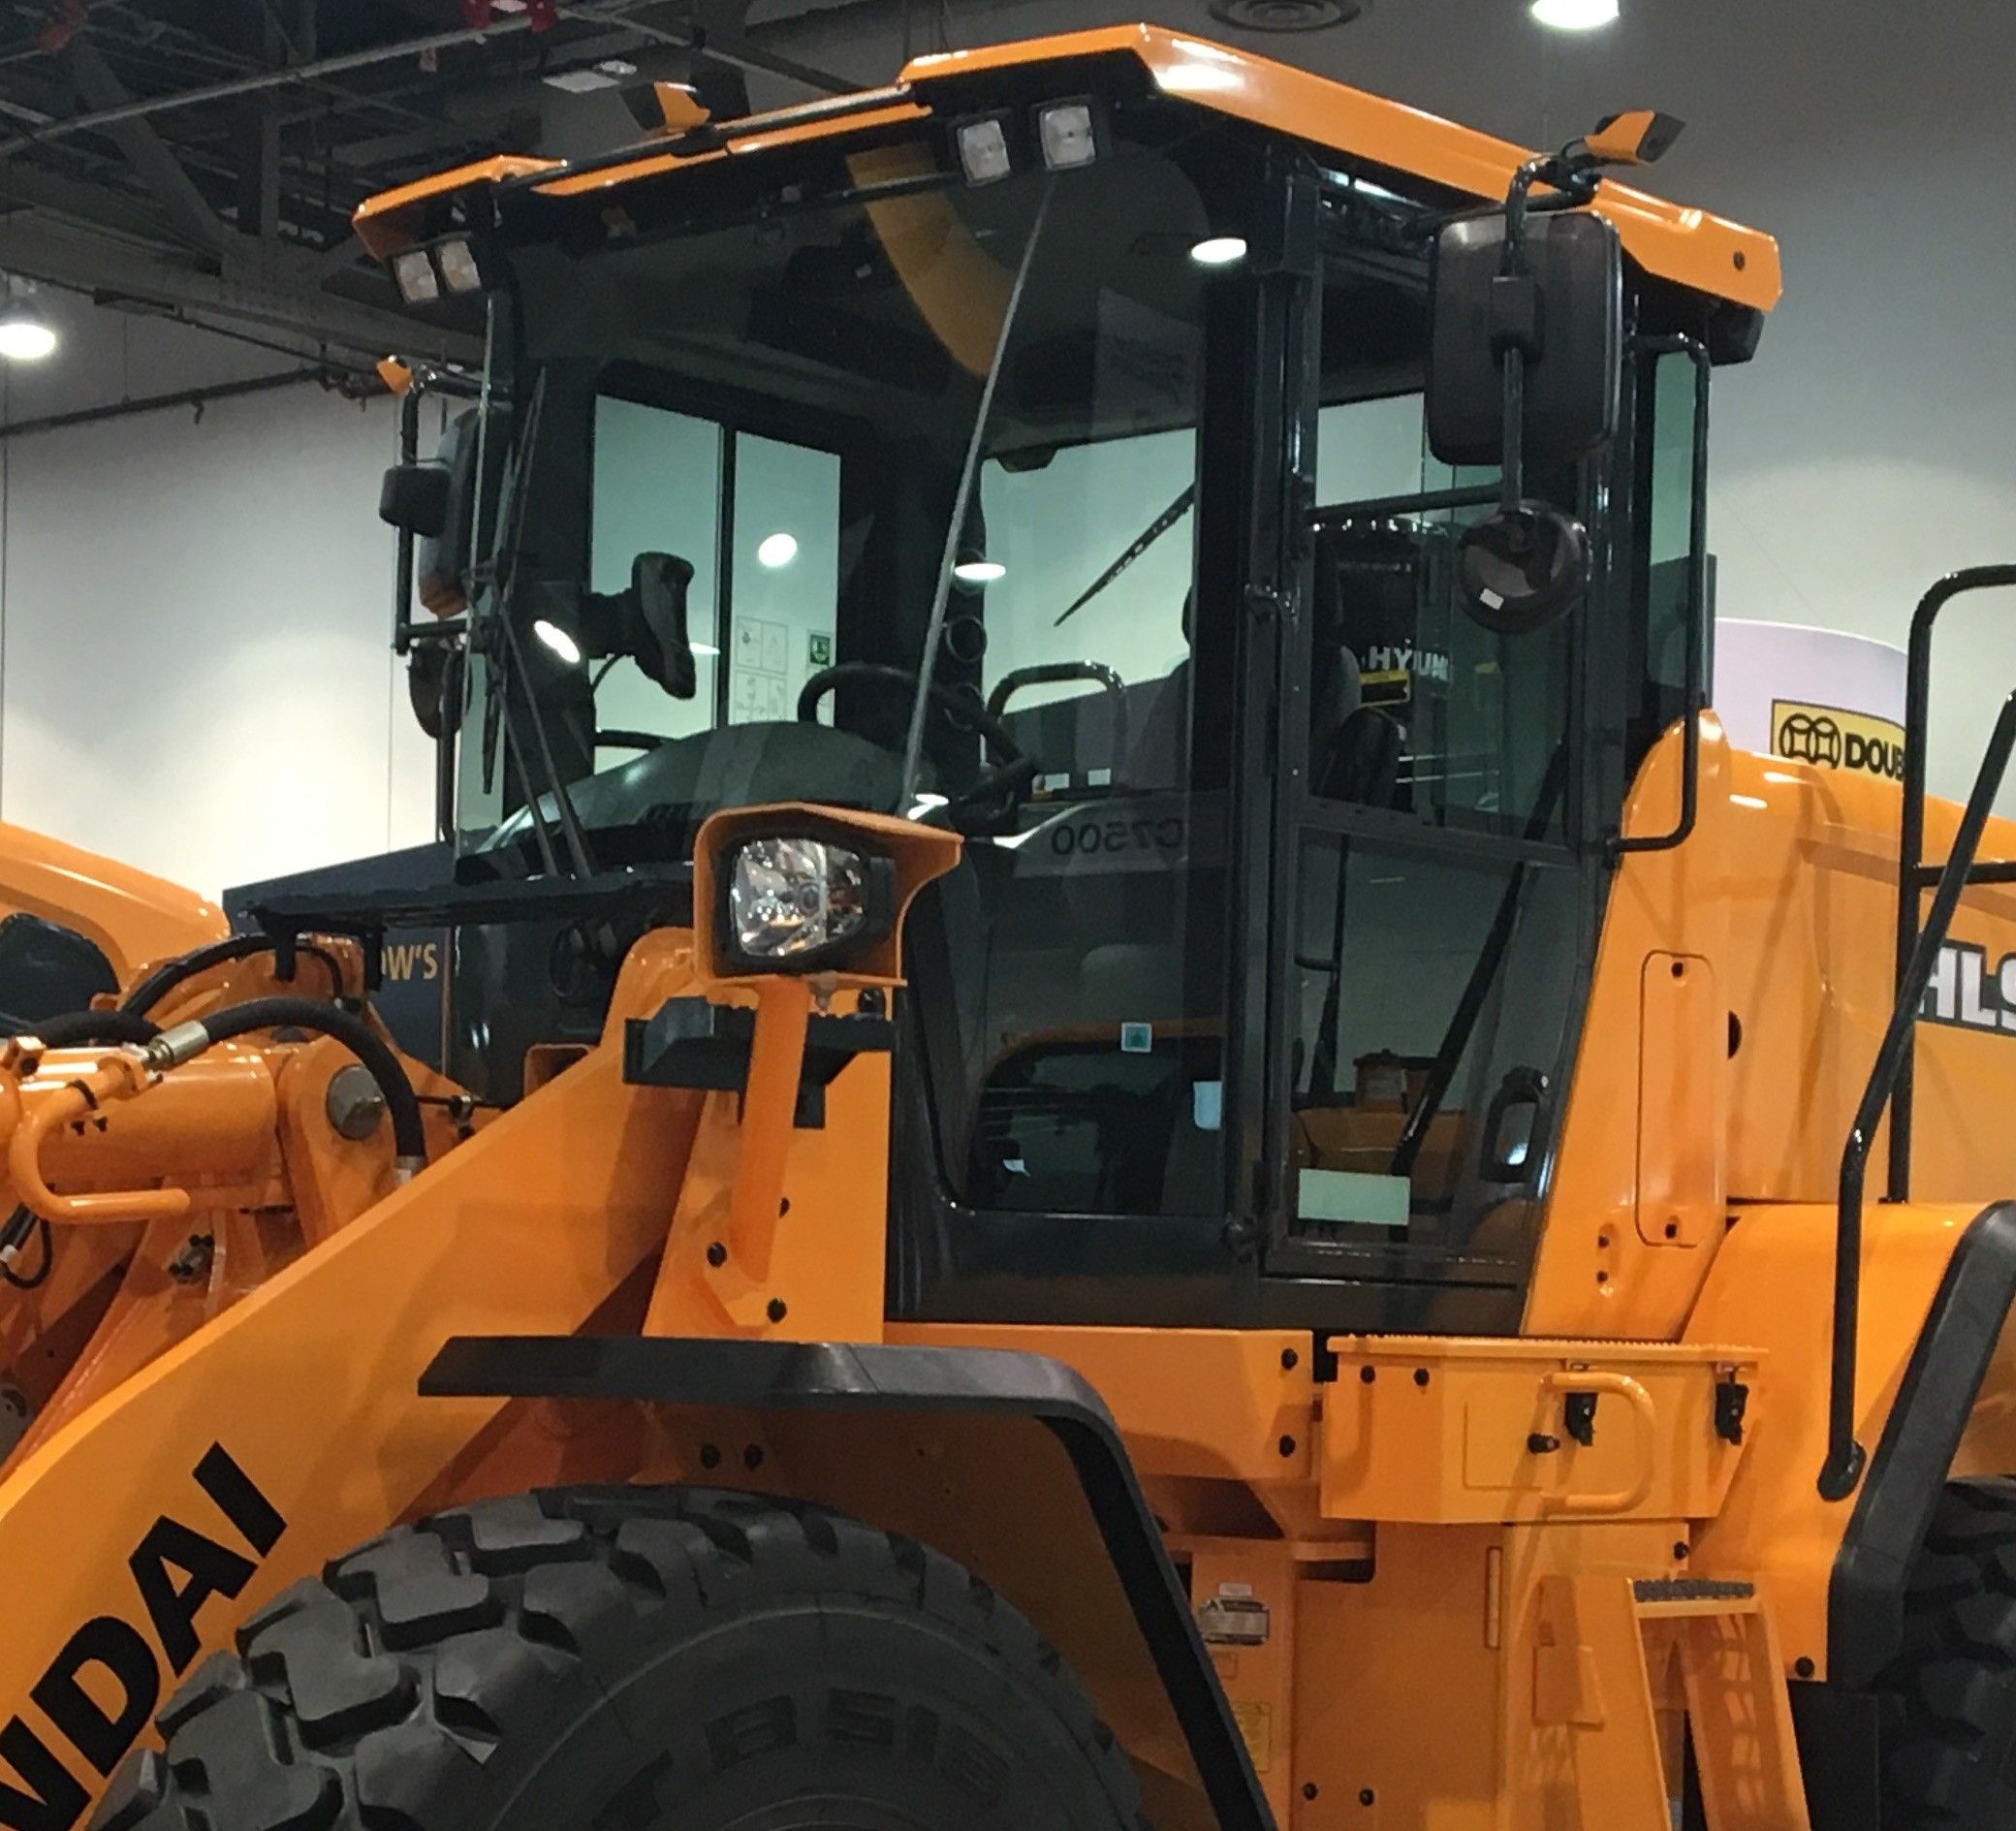 Hyundai Construction Equipment Americas Adds  All-Around View Monitoring to HL900 Wheel Loaders